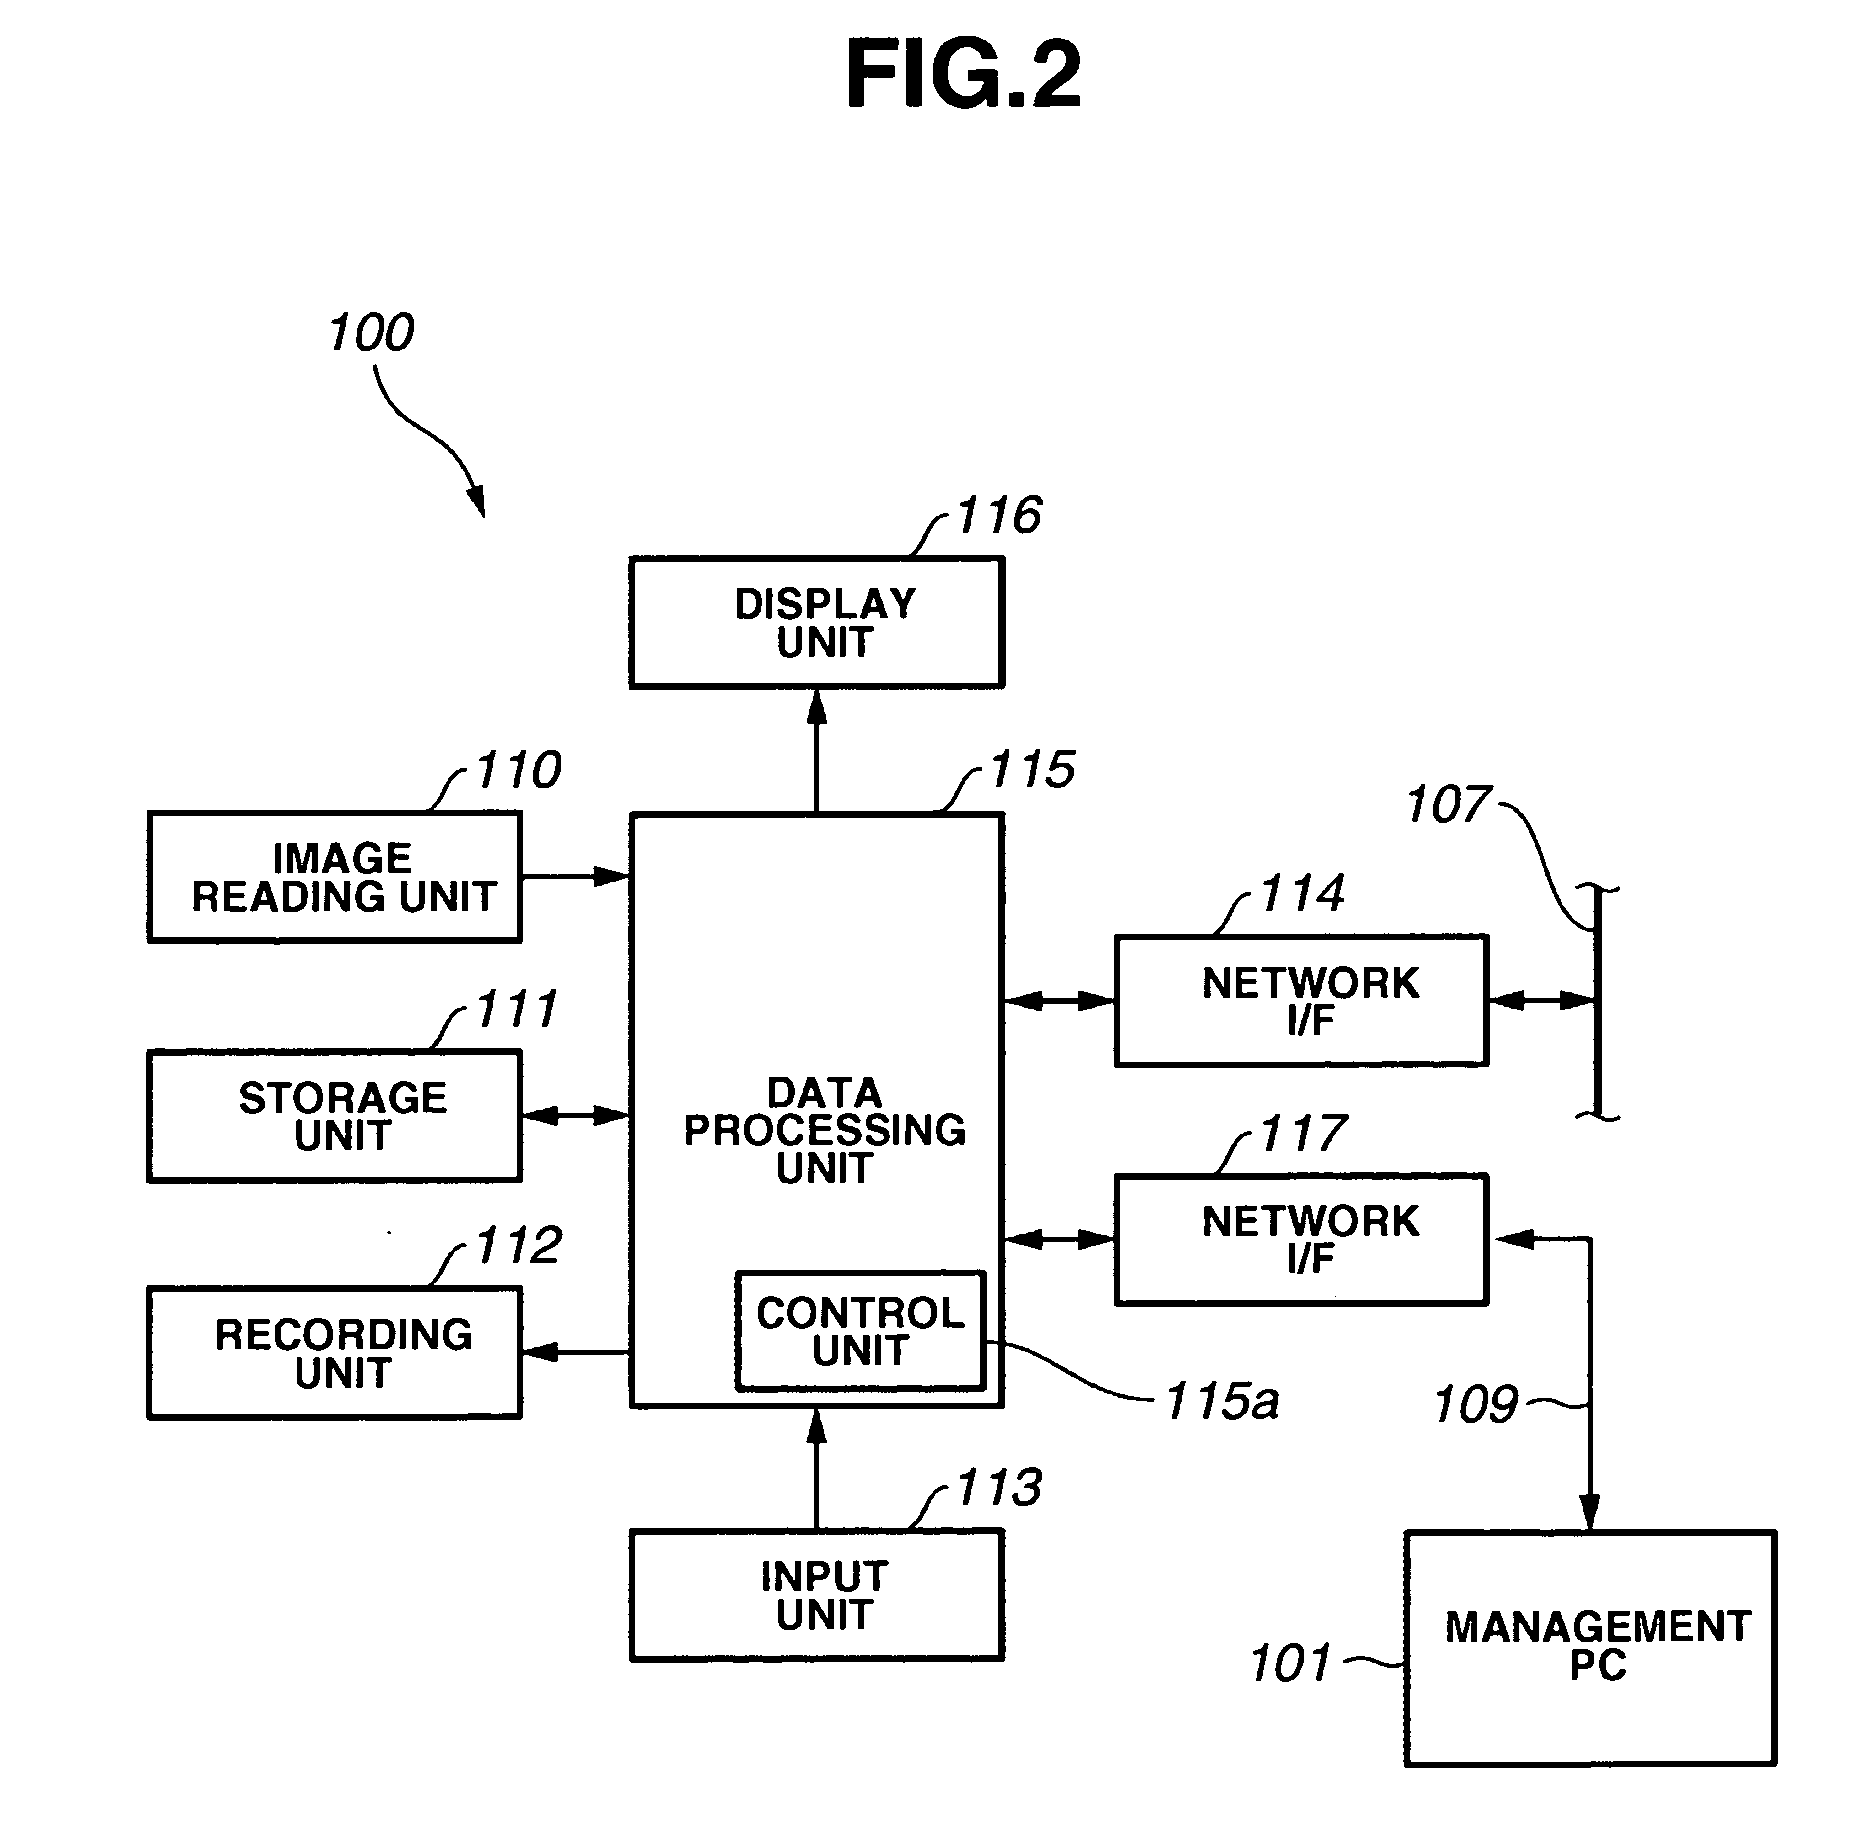 Image processing apparatus and a method therefor